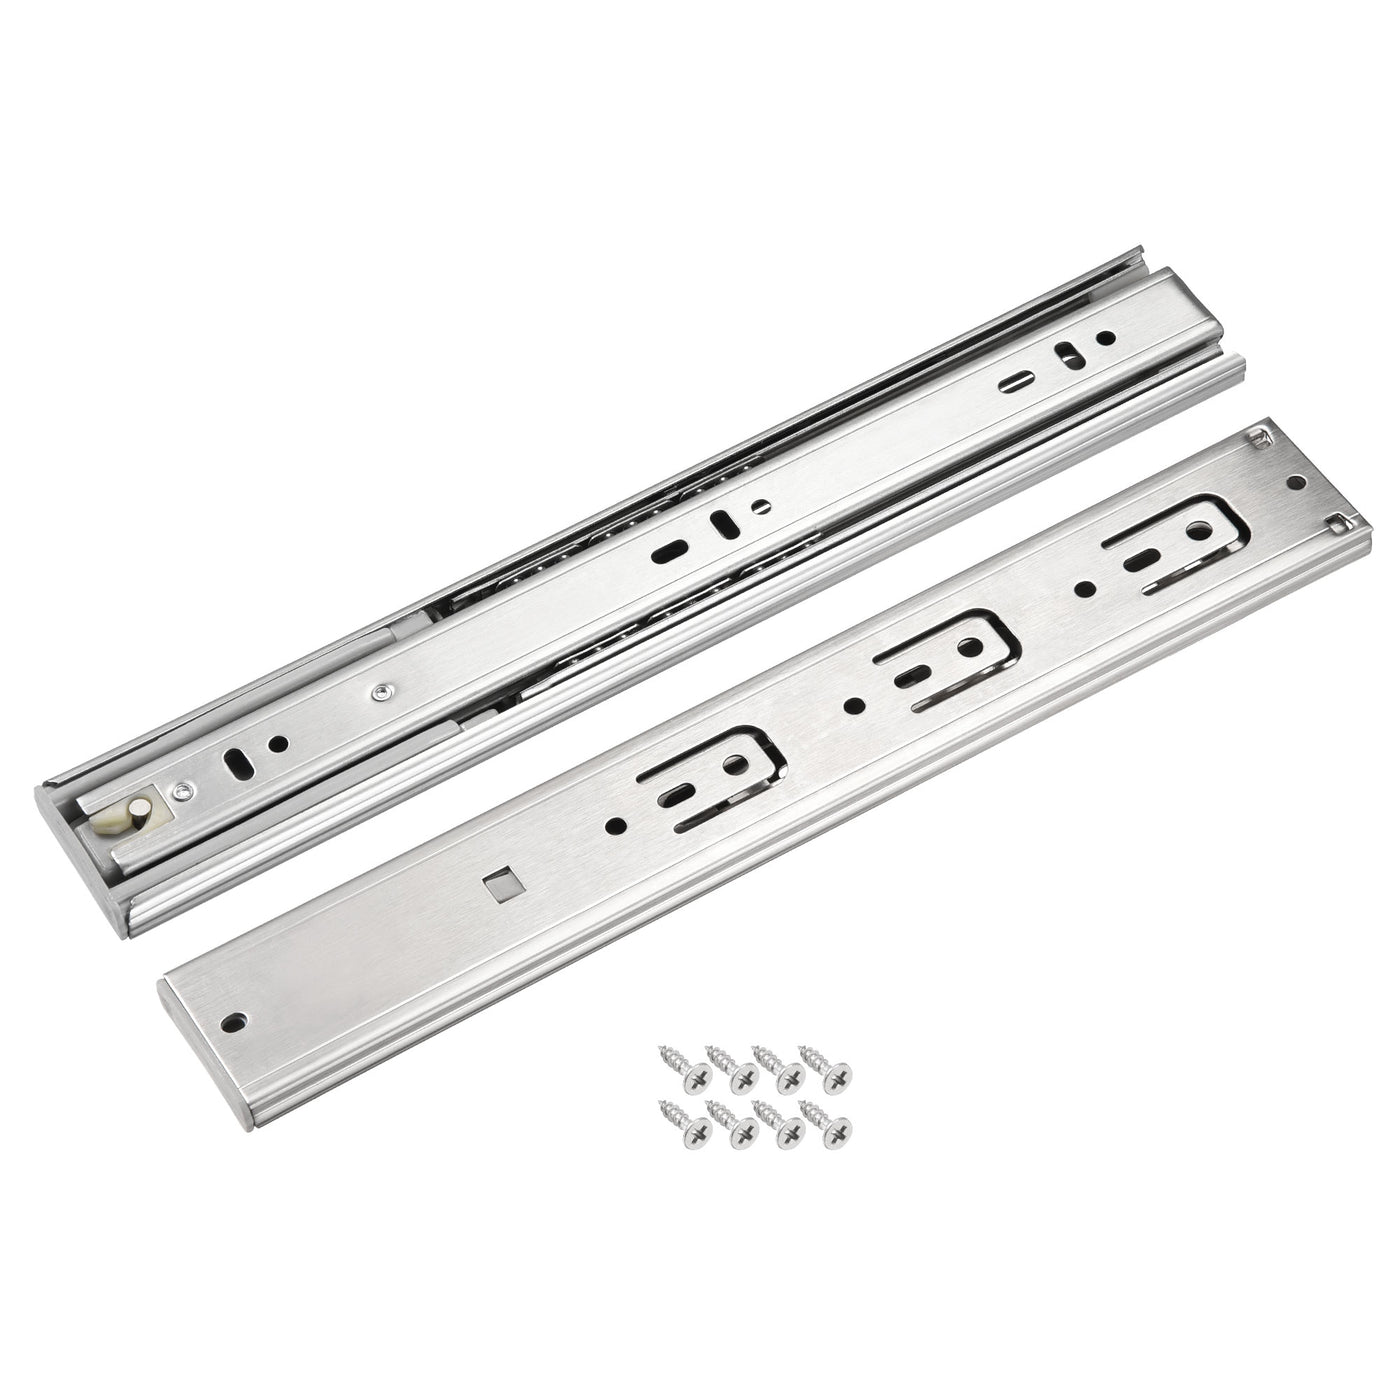 uxcell Uxcell 11.8Inch Drawer Slides Soft-Close Ball Bearing Slide Track Rail with Spring Damping 44mm Wide 3 Sections 100lb Capacity , 1 Pair